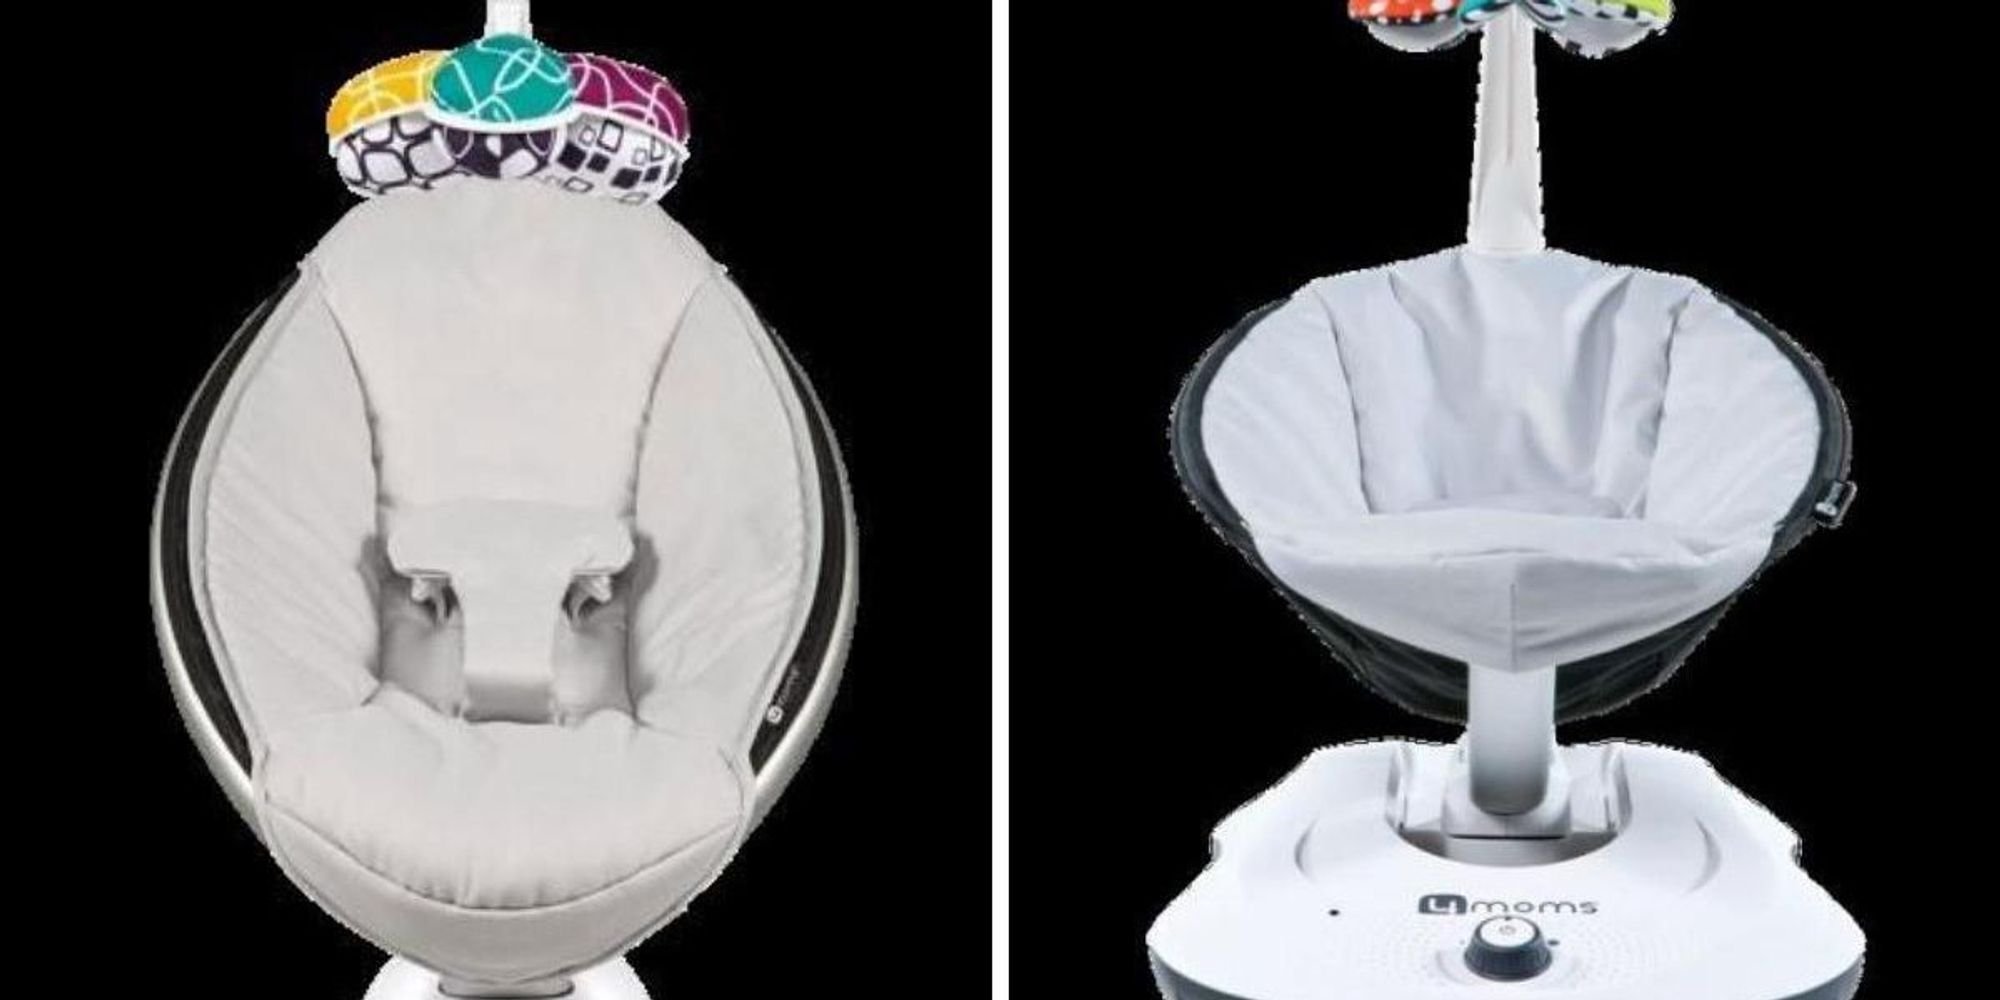 A Baby Swing Company Is Recalling Models In Canada Due To A 'Strangulation Hazard'